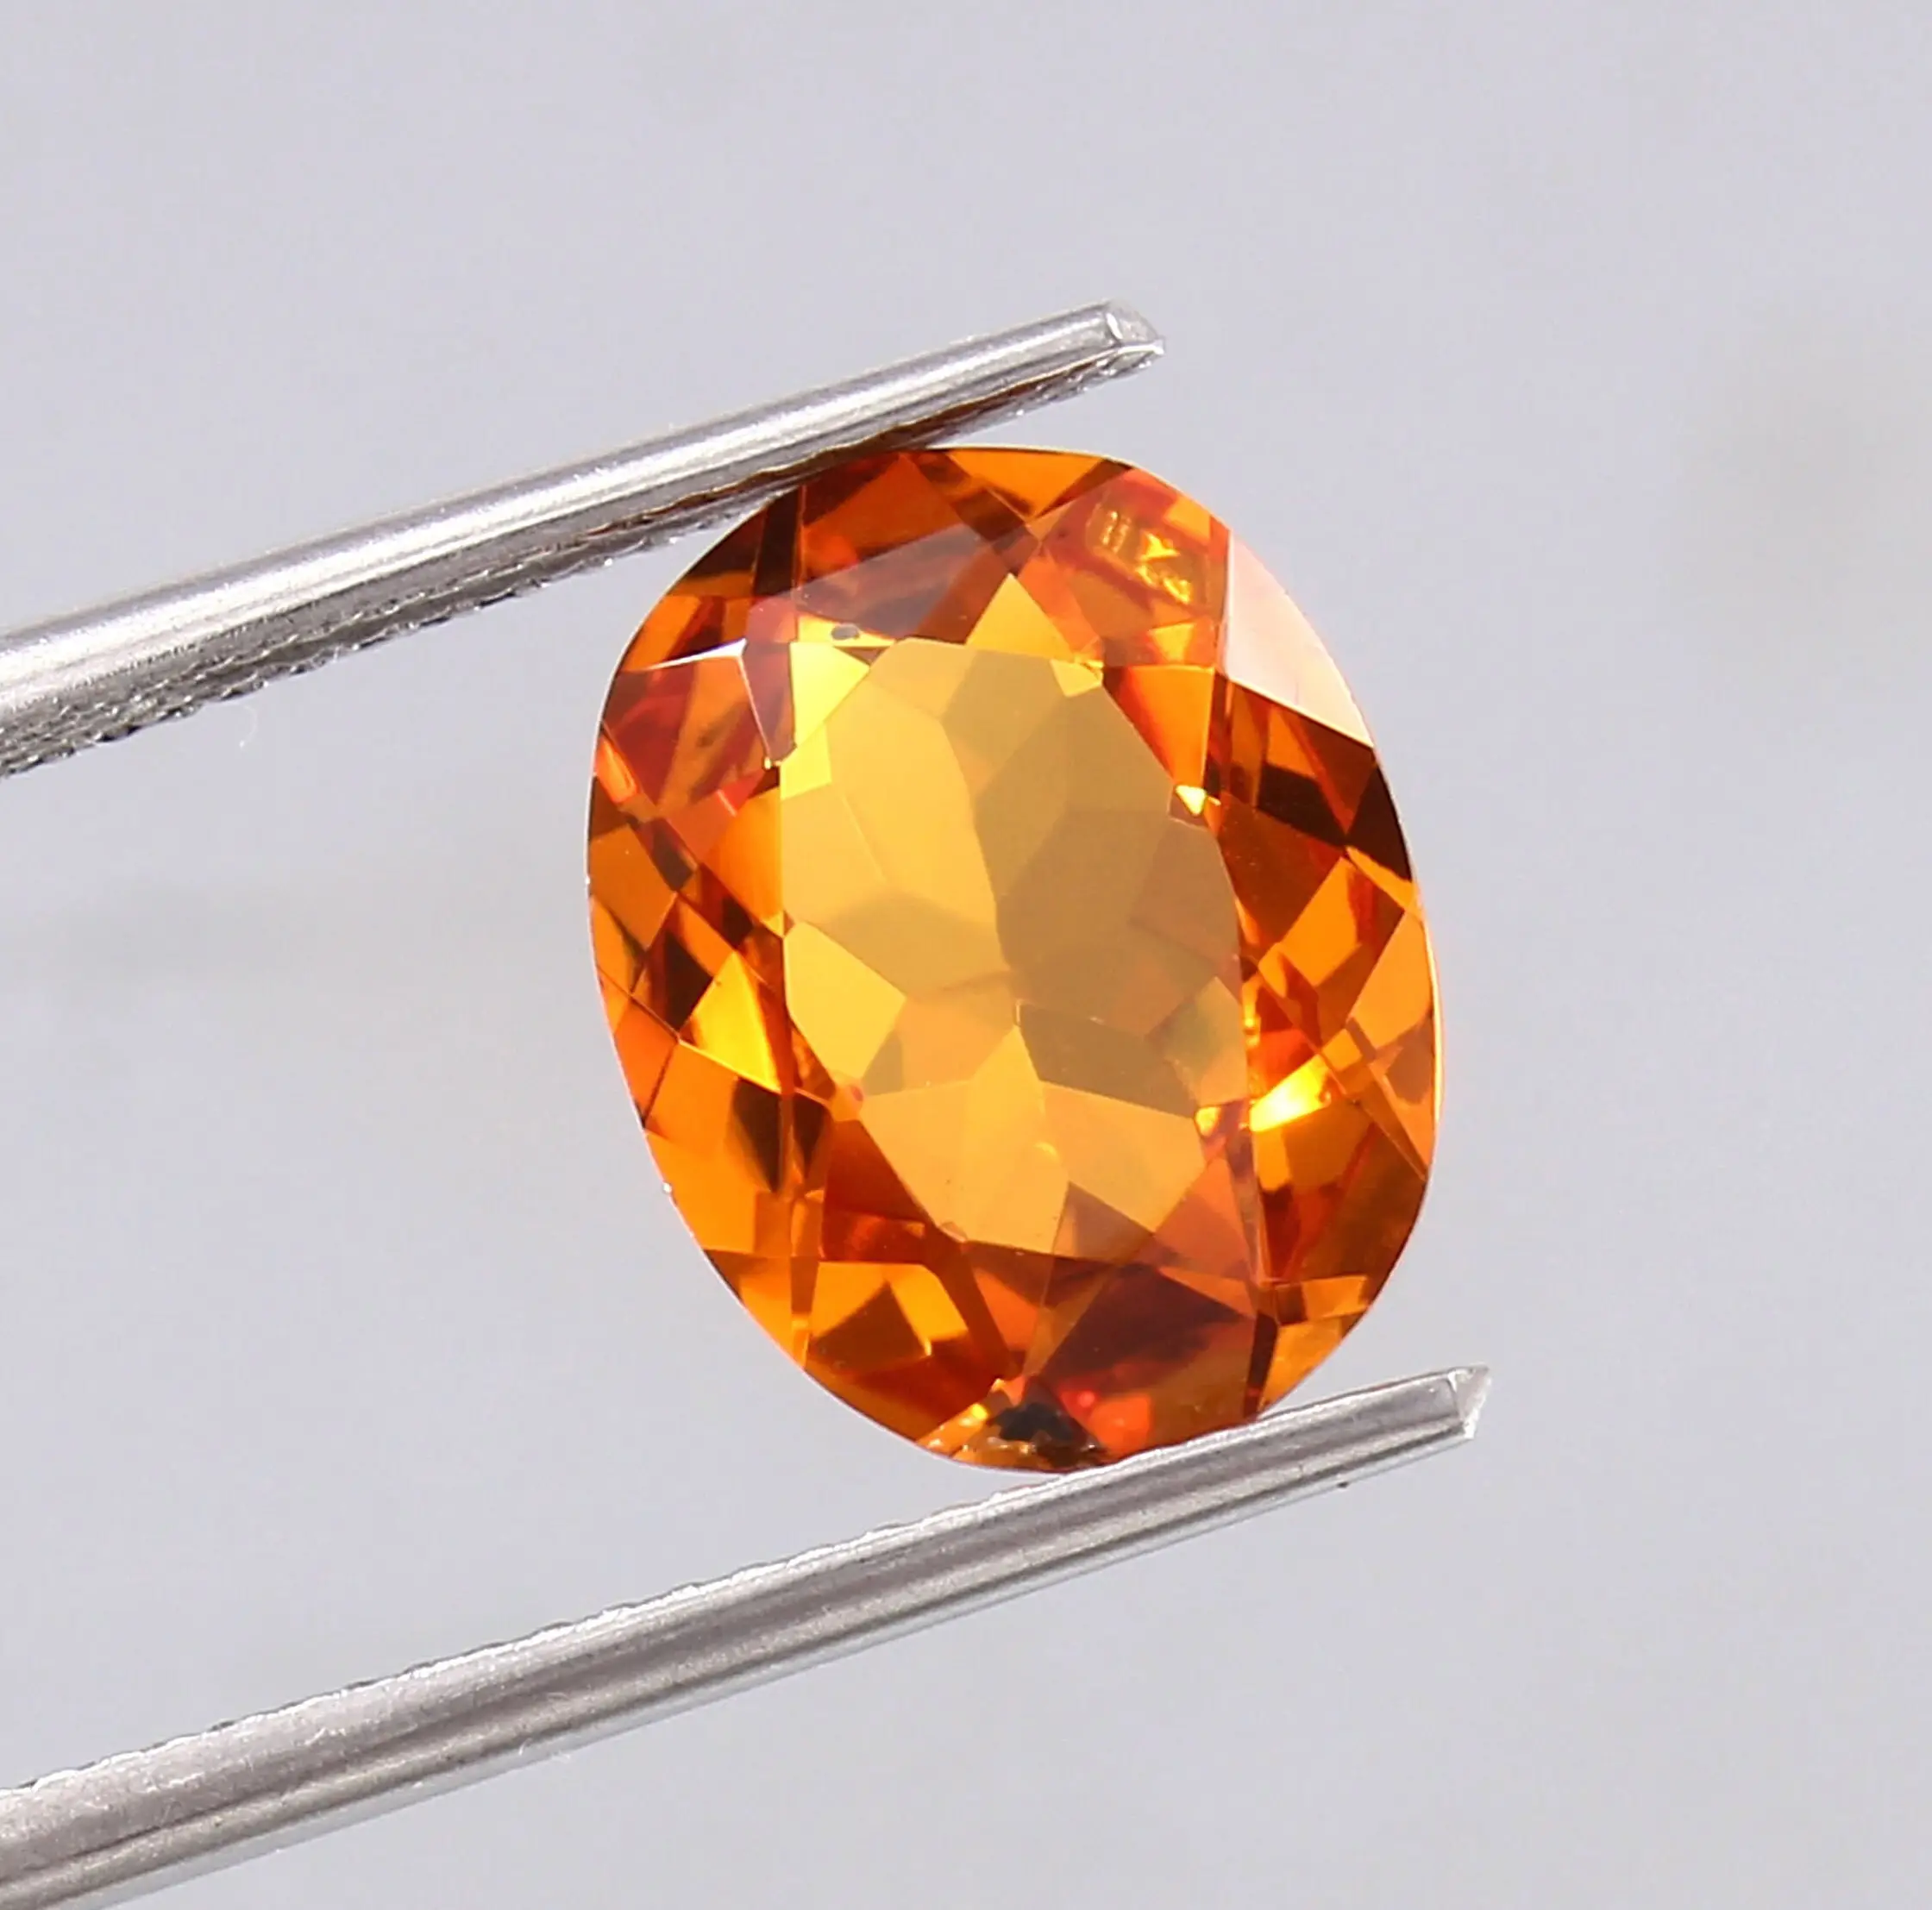 Fantastic Orange Citrine Oval Loose Gemstone For Making For Beautiful Her Jewelry Calibrated All Size Available 6x4mm To 18x25mm